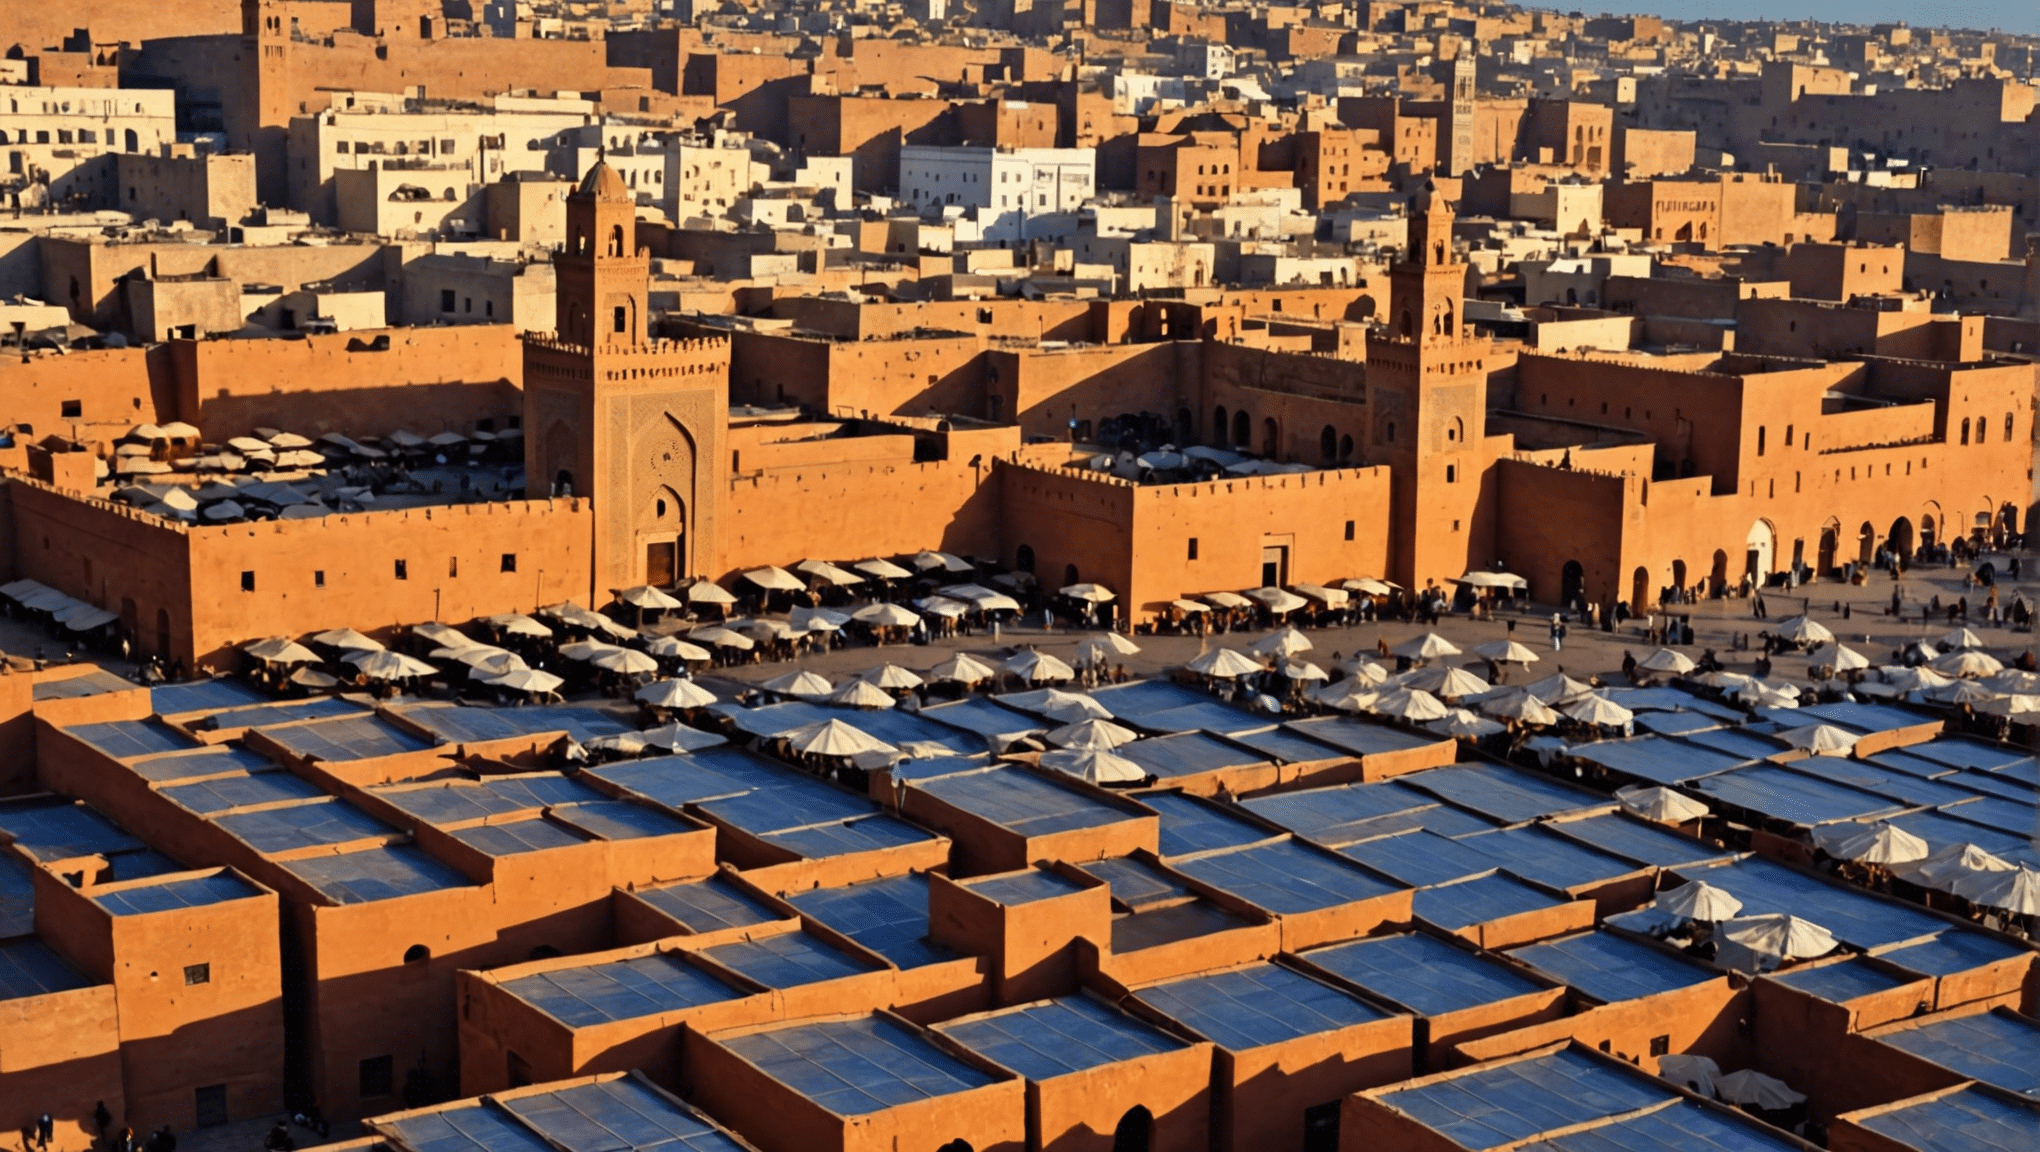 discover if morocco experiences hot temperatures in january. plan your trip wisely with this essential information about the climate in morocco during the month of january.